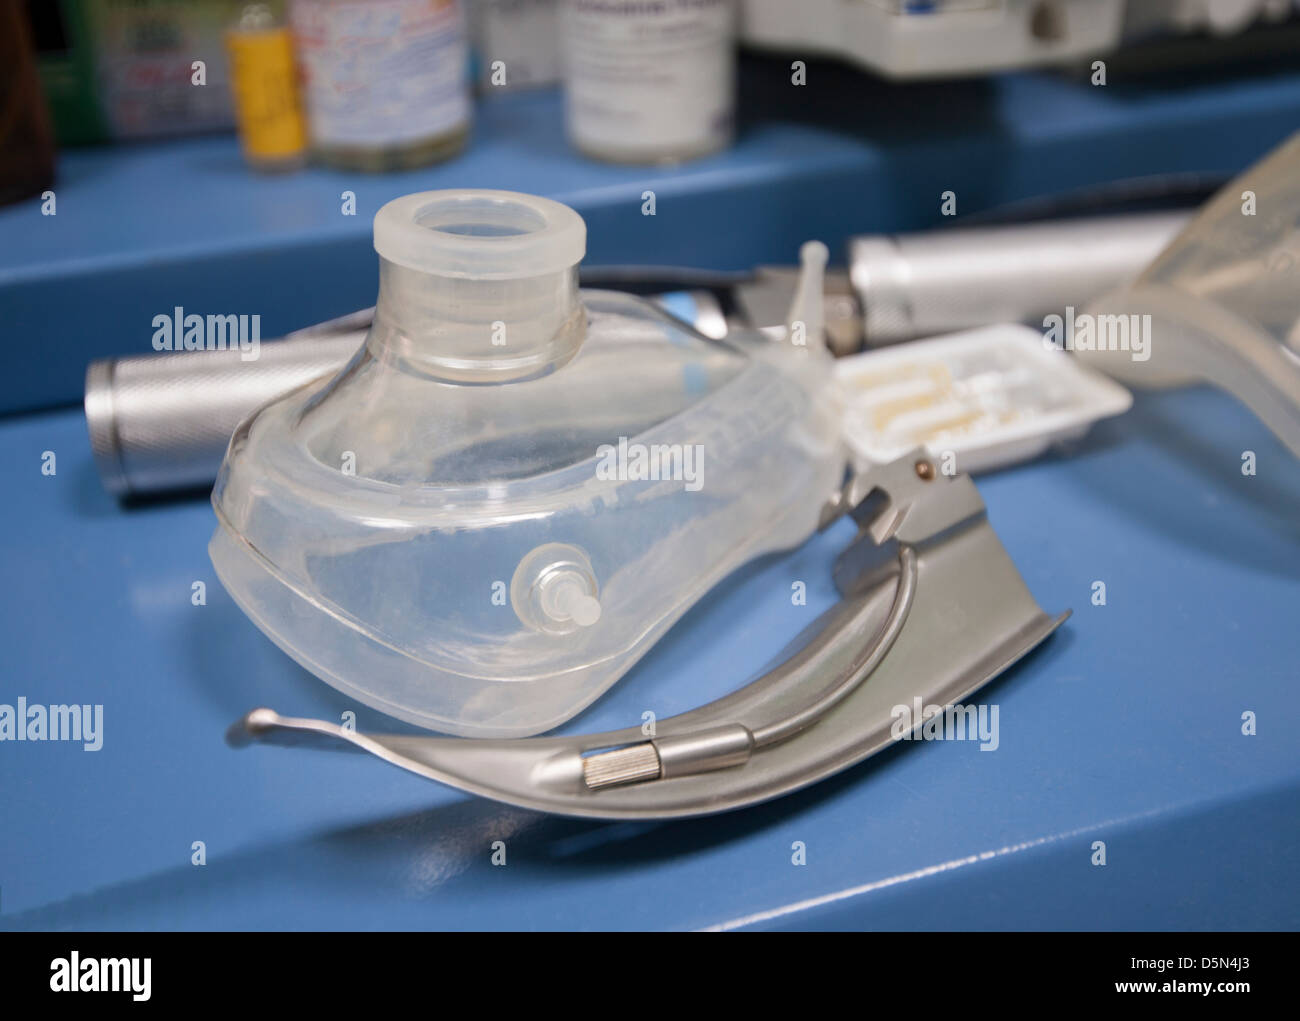 Closeup detail of a plastic oxygen mask on table in operating room Stock Photo